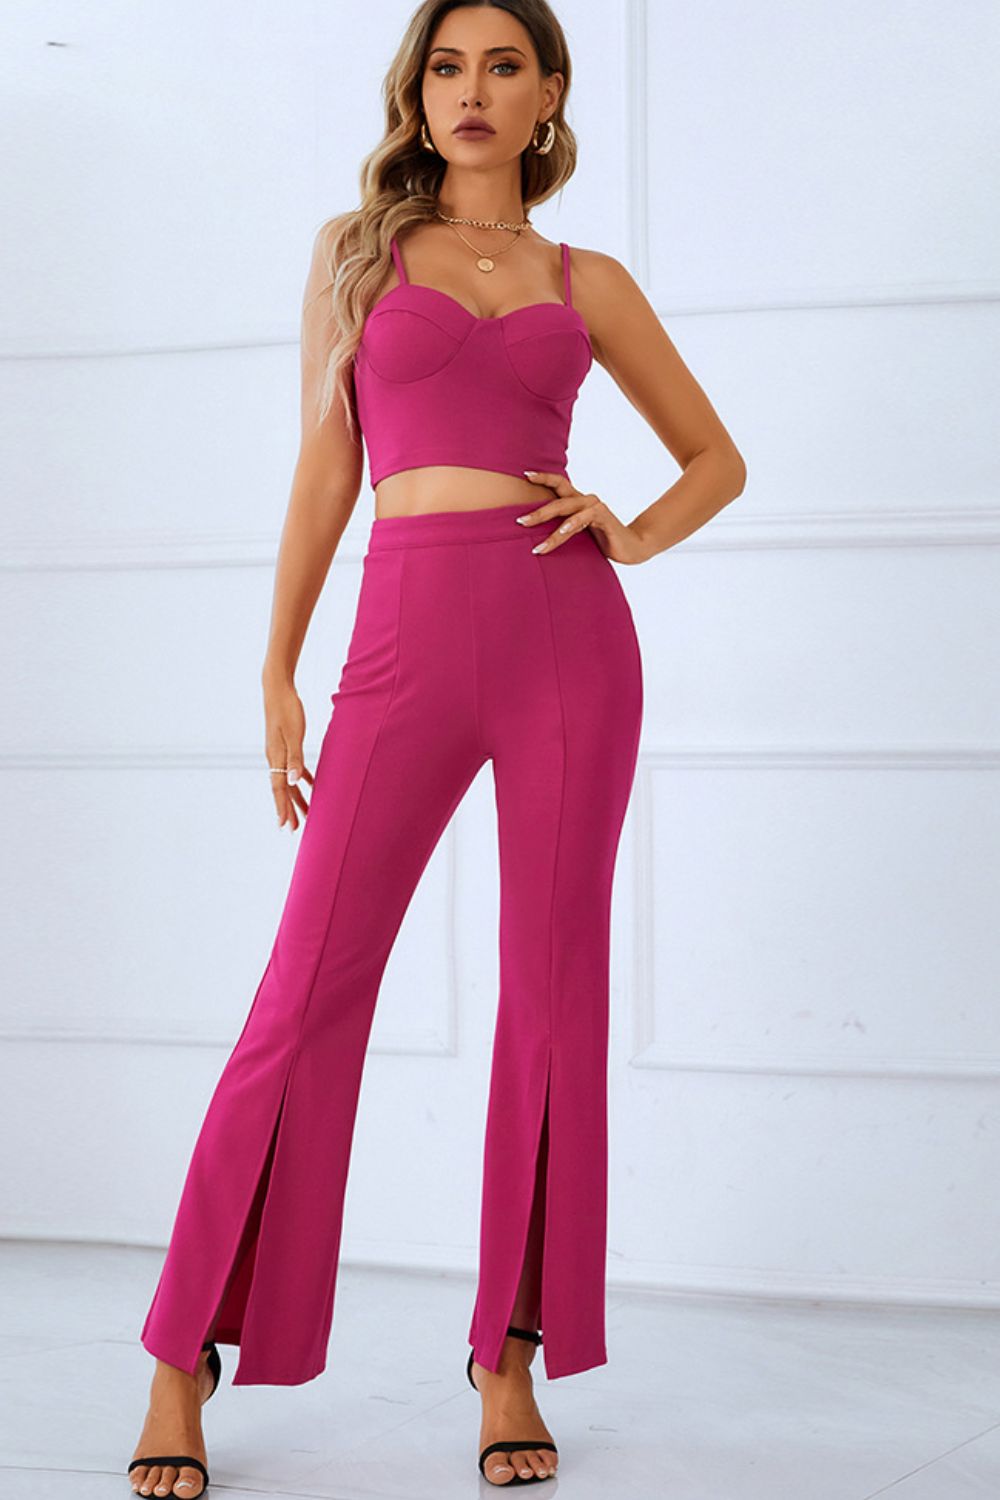 Goddess of Elegance - Adorn Yourself in Pure Romance and Grace with our Sweetheart Neck Sports Cami and Slit Ankle Flare Pants Set - Embrace your Inner Confidence. - Guy Christopher